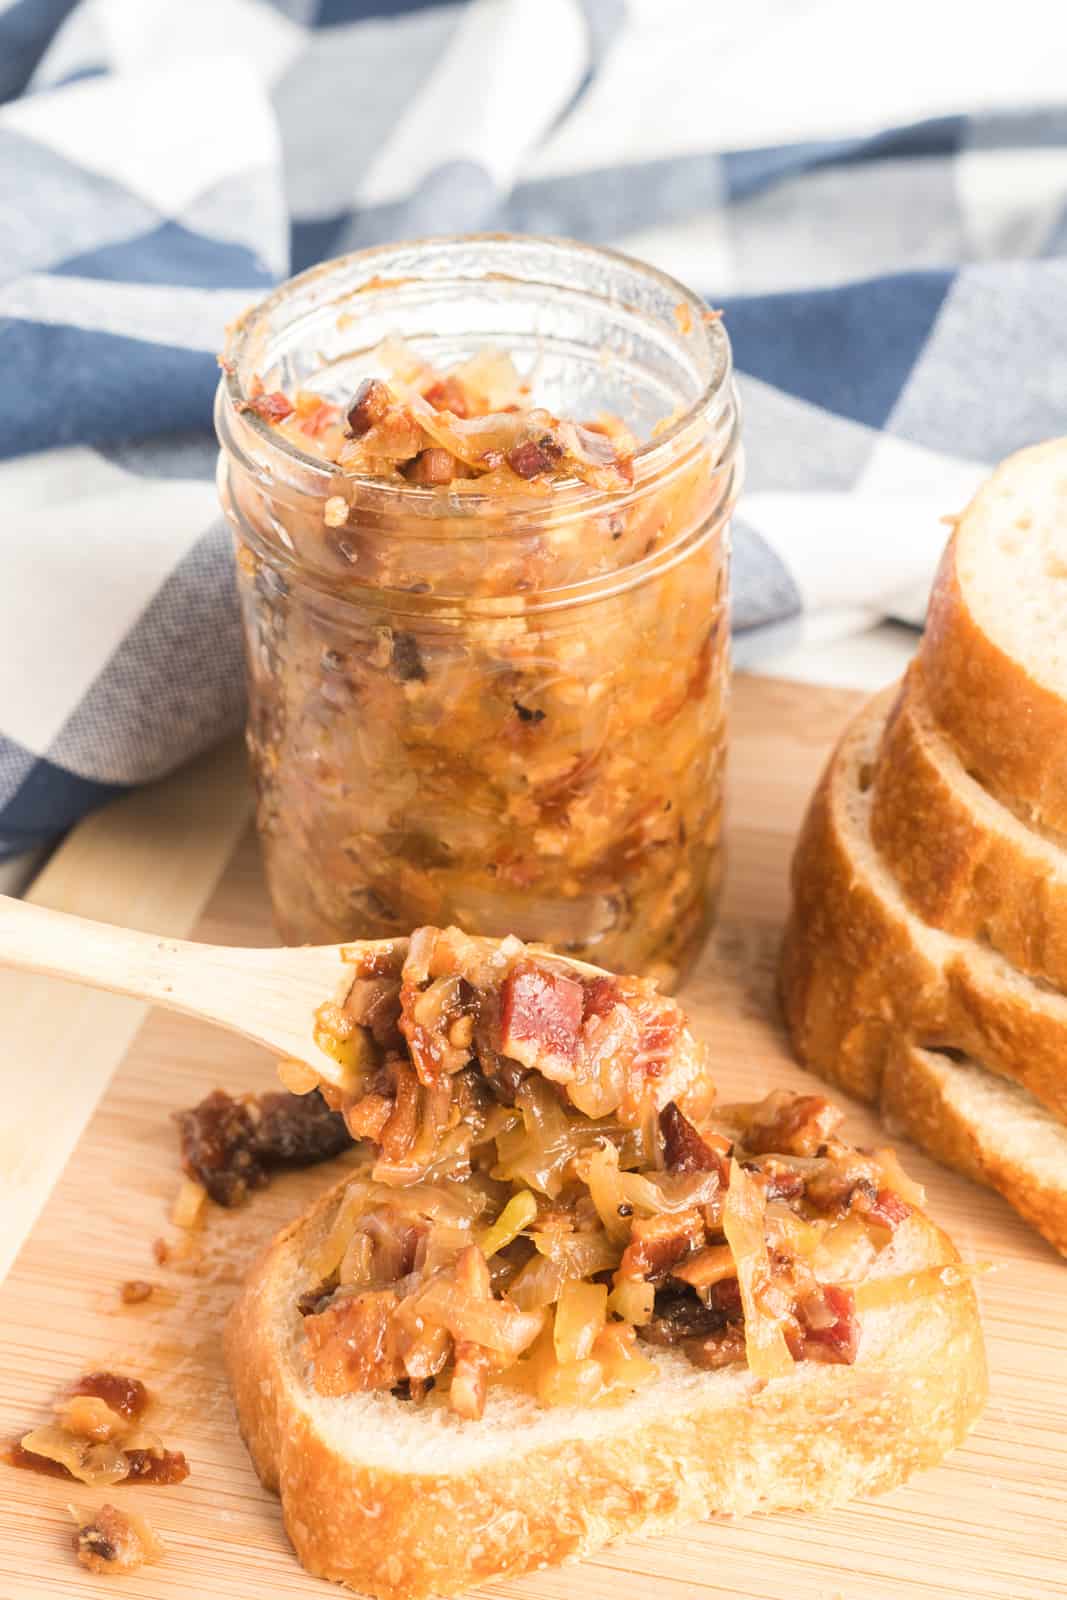 Spoon spooning some bacon jam onto slice of bread with canning jar in background